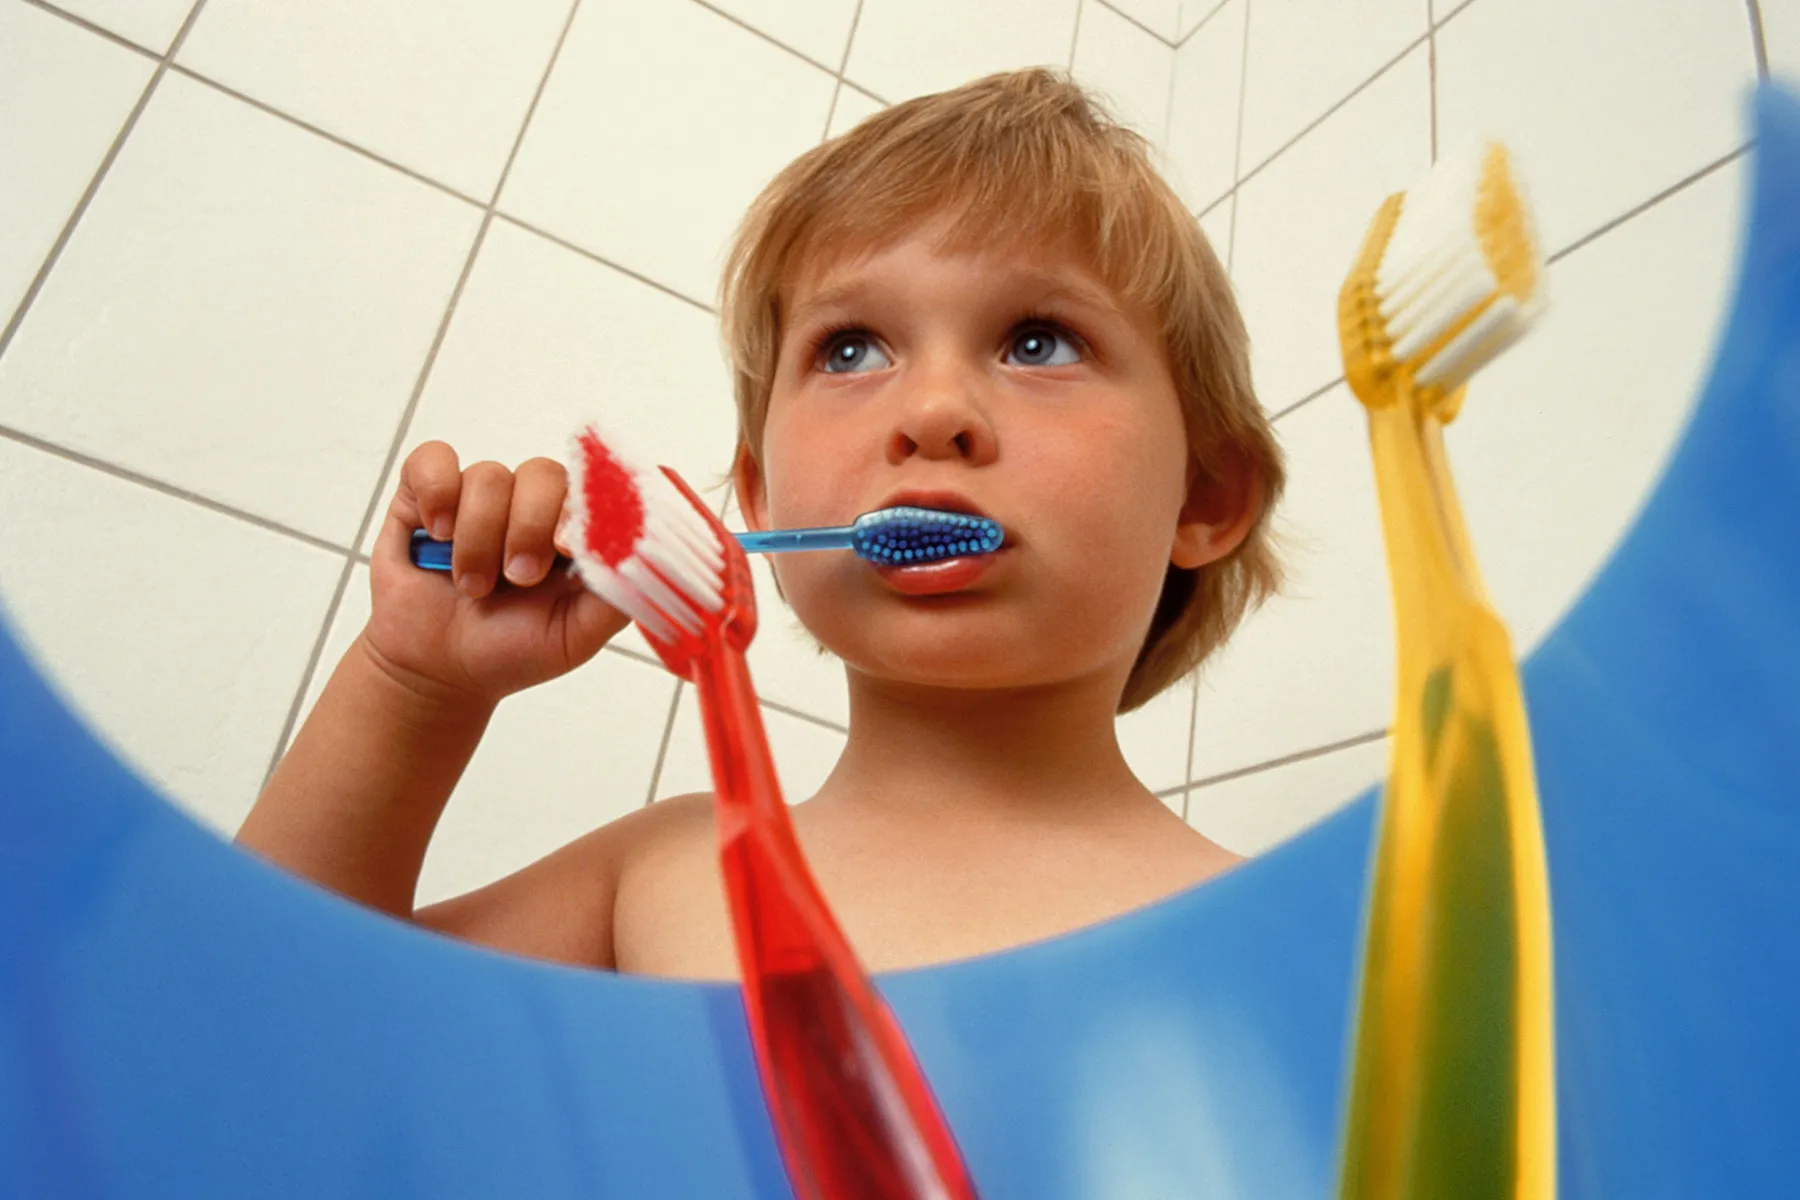 The ‘Oreo Test’ and Other Ways to Help Kids’ Oral Health